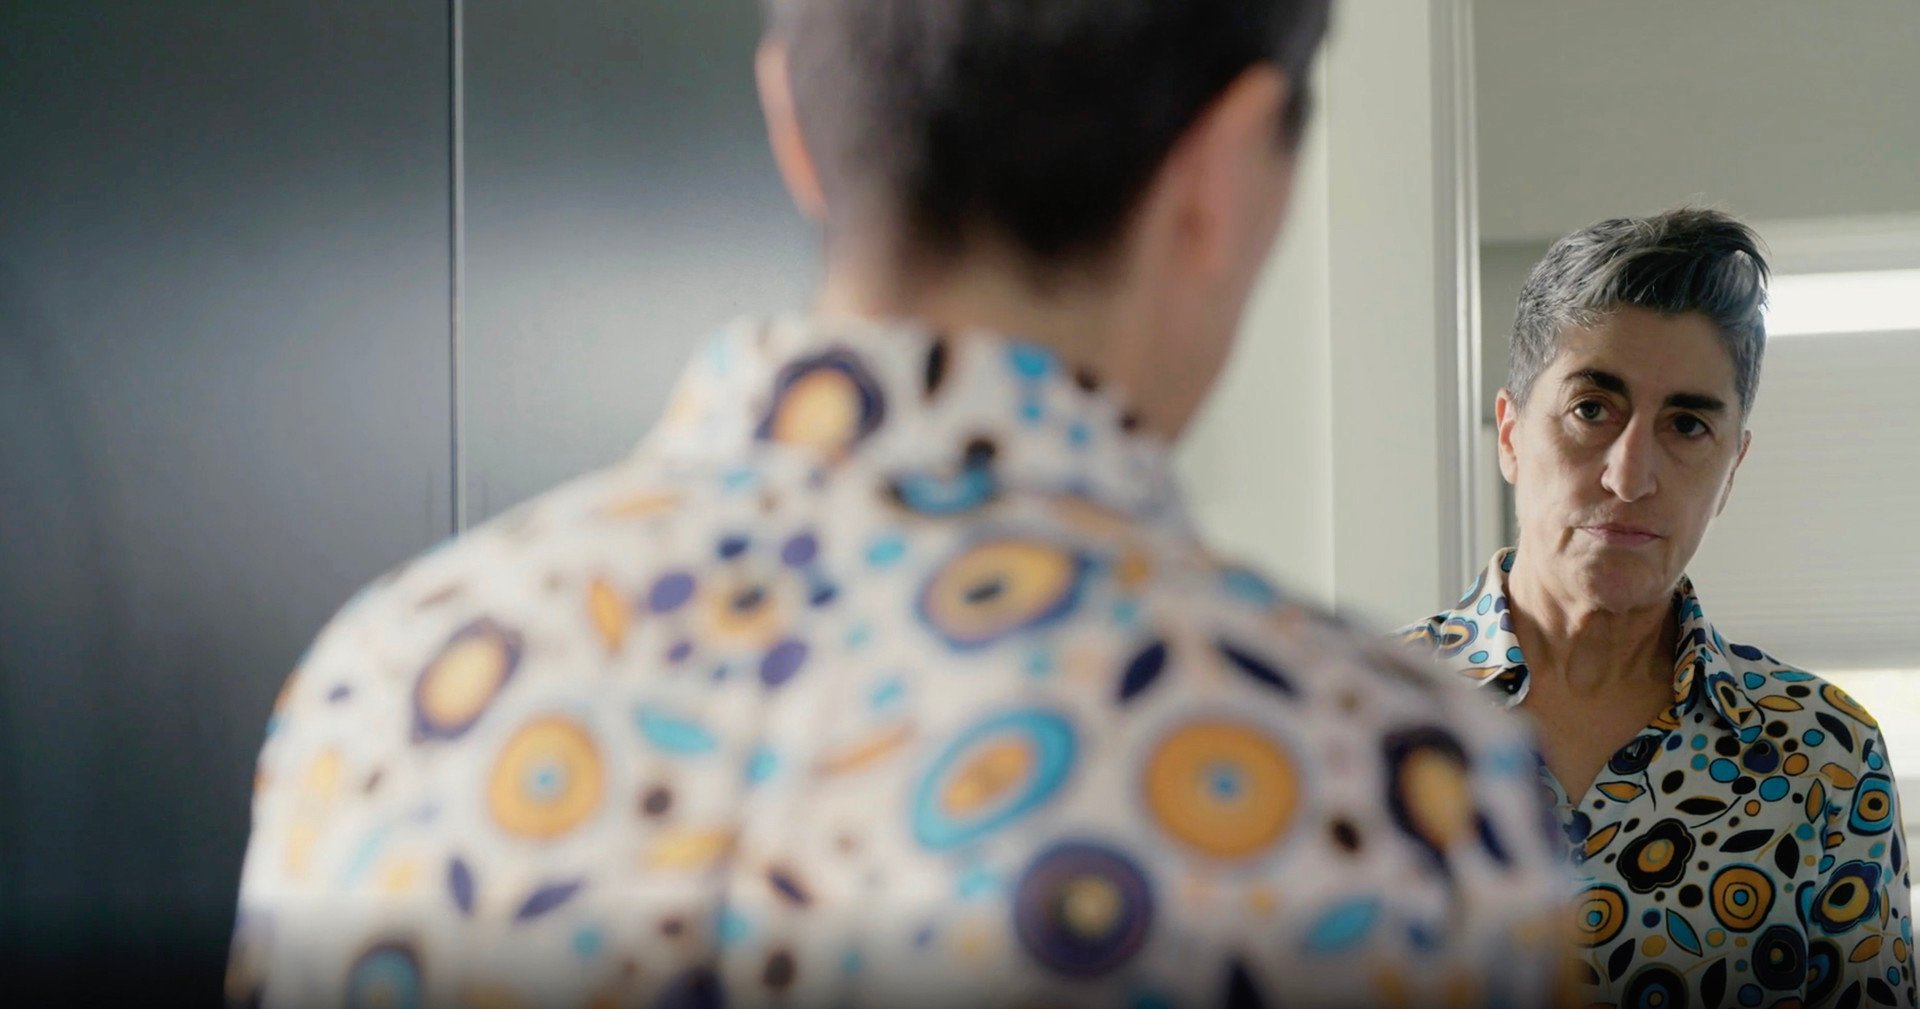 Sarah looks at herself in the mirror. She’s wearing a colourful shirt with designs in blue, orange and purple.